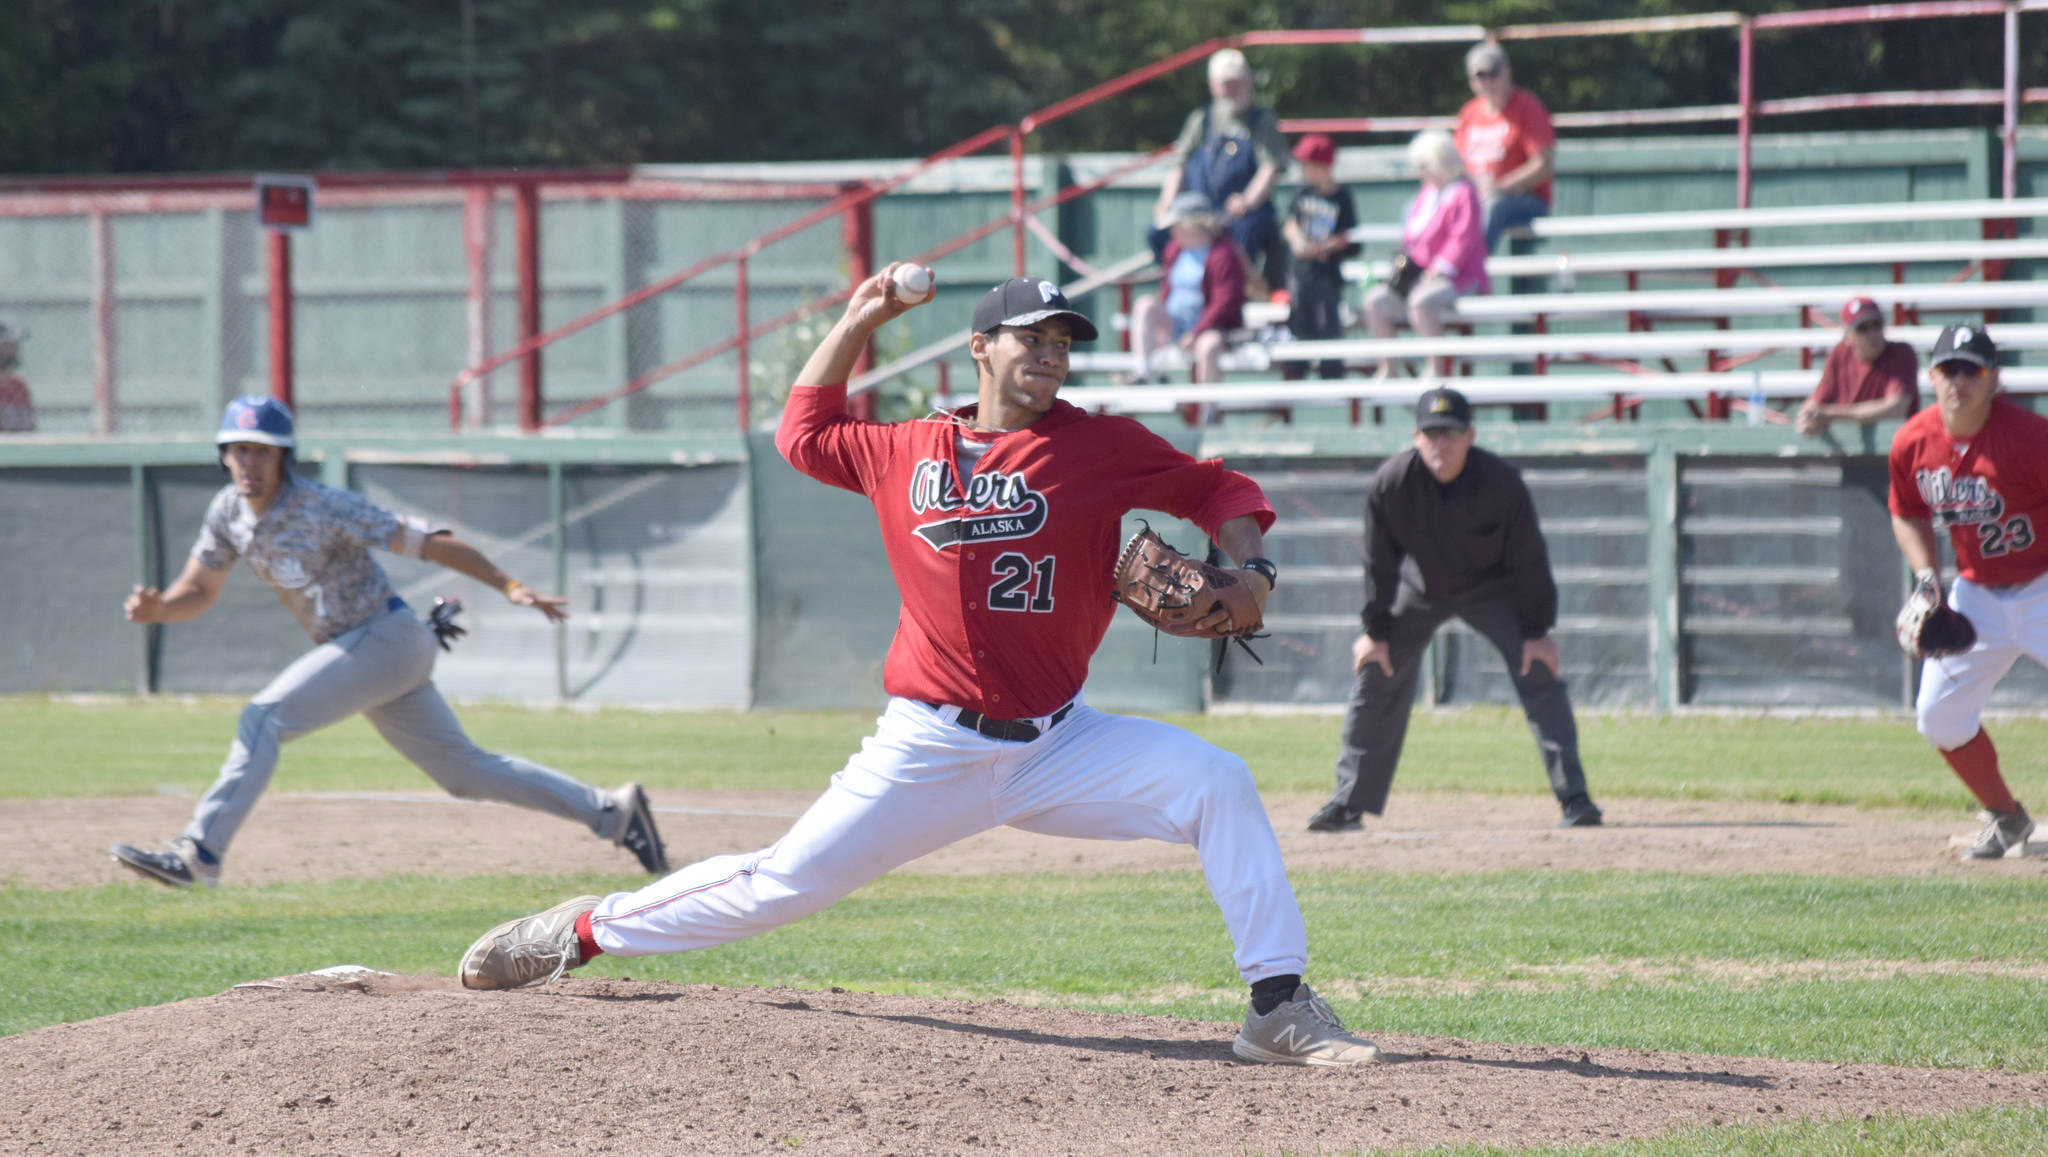 Peninsula Oilers reliever Giancarlos Servin delivers to the Anchorage Glacier Pilots on Sunday, June 30, 2019, at Coral Seymour Memorial Park in Kenai, Alaska. (Photo by Jeff Helminiak/Peninsula Clarion)